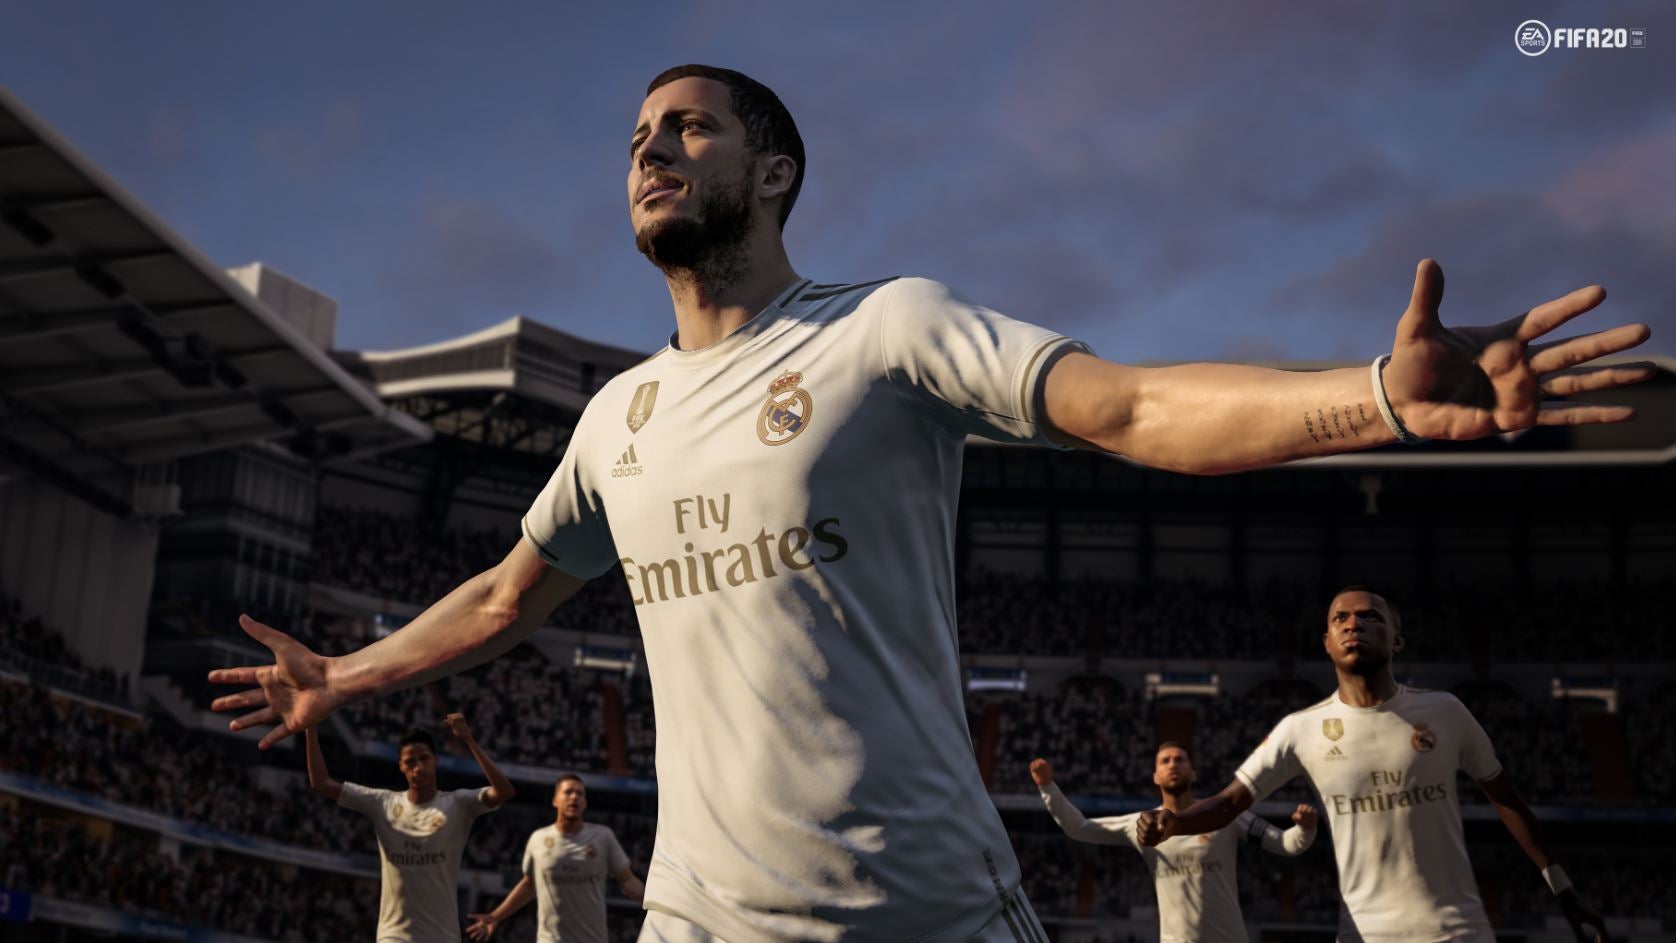 Image for Not even The Witcher 3's Switch launch can dethrone Fifa 20 in the UK charts